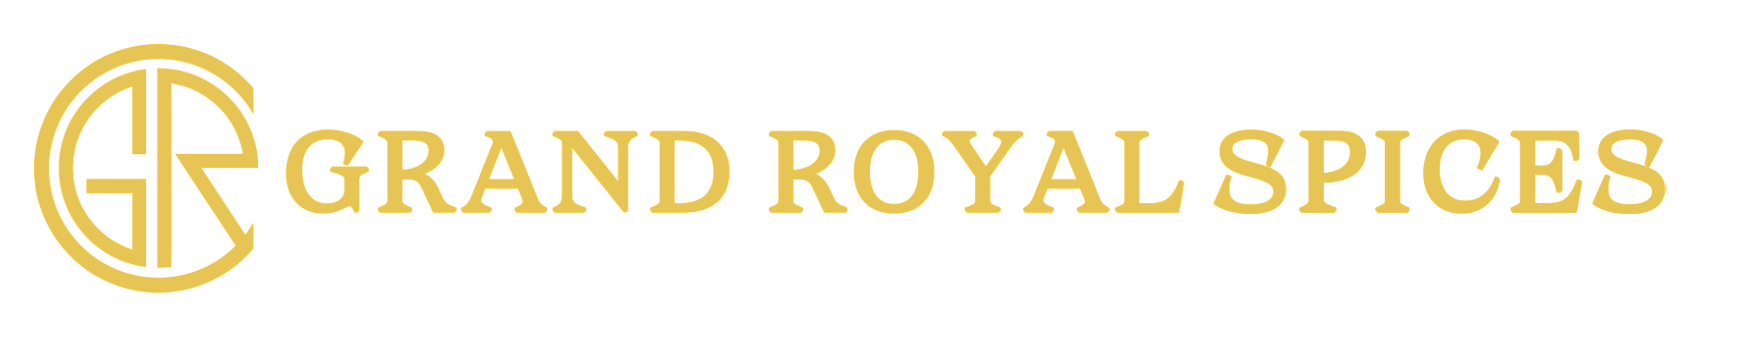 Grand Royal Spices